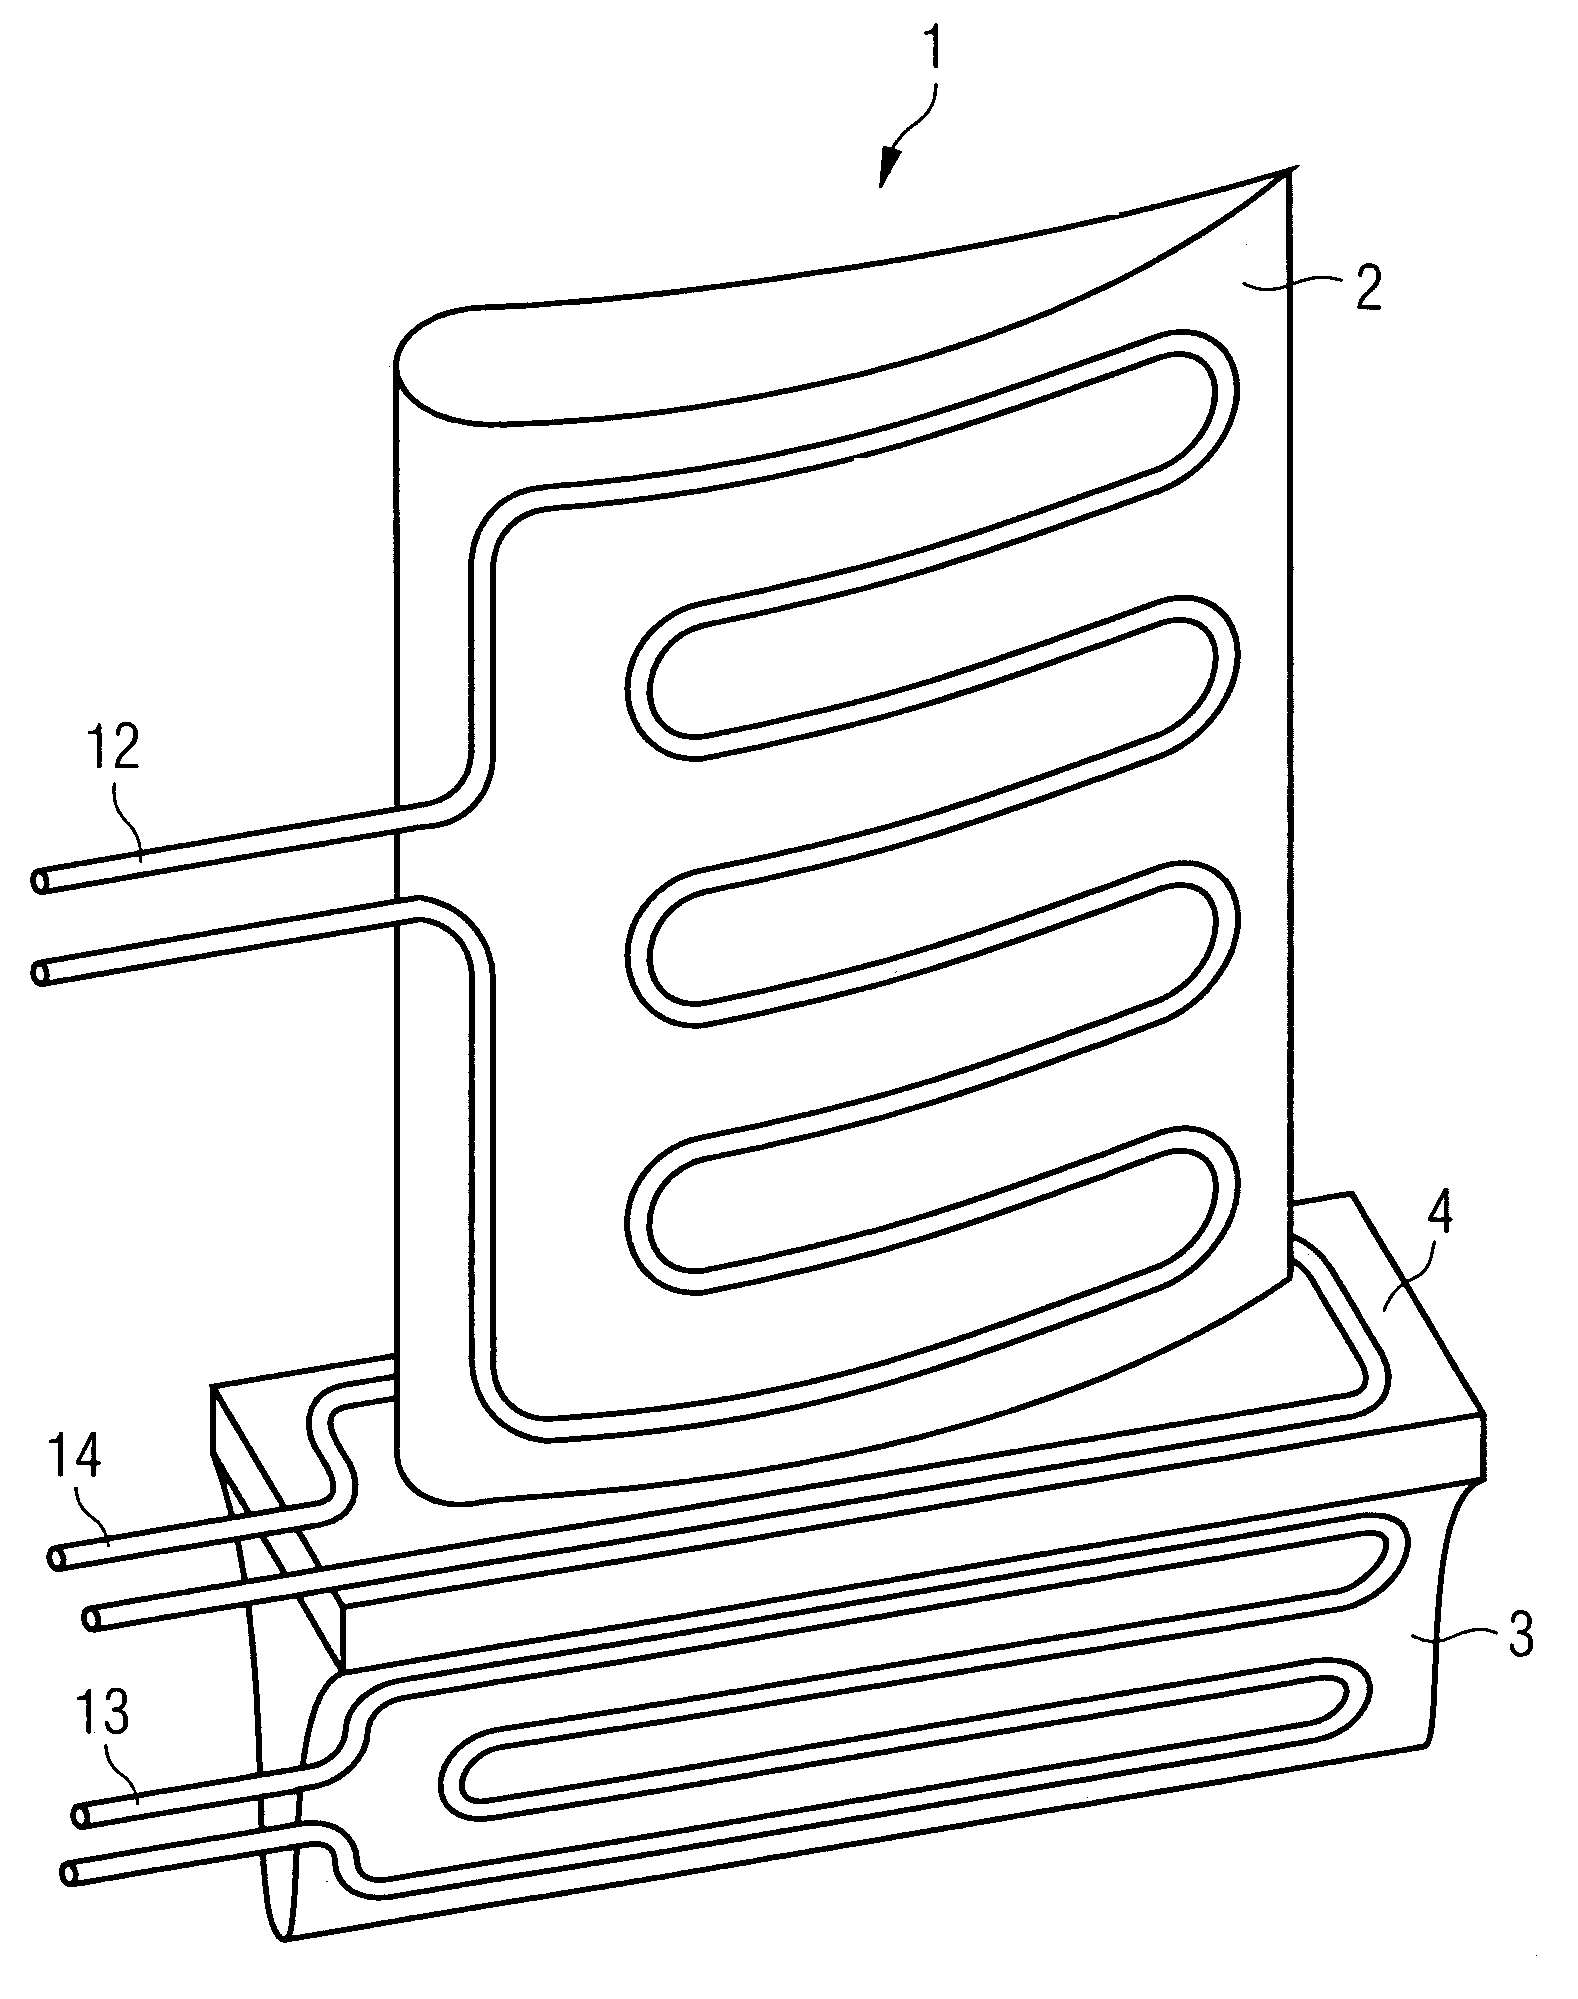 Heat treatment method for monocrystalline or directionally solidified structural components